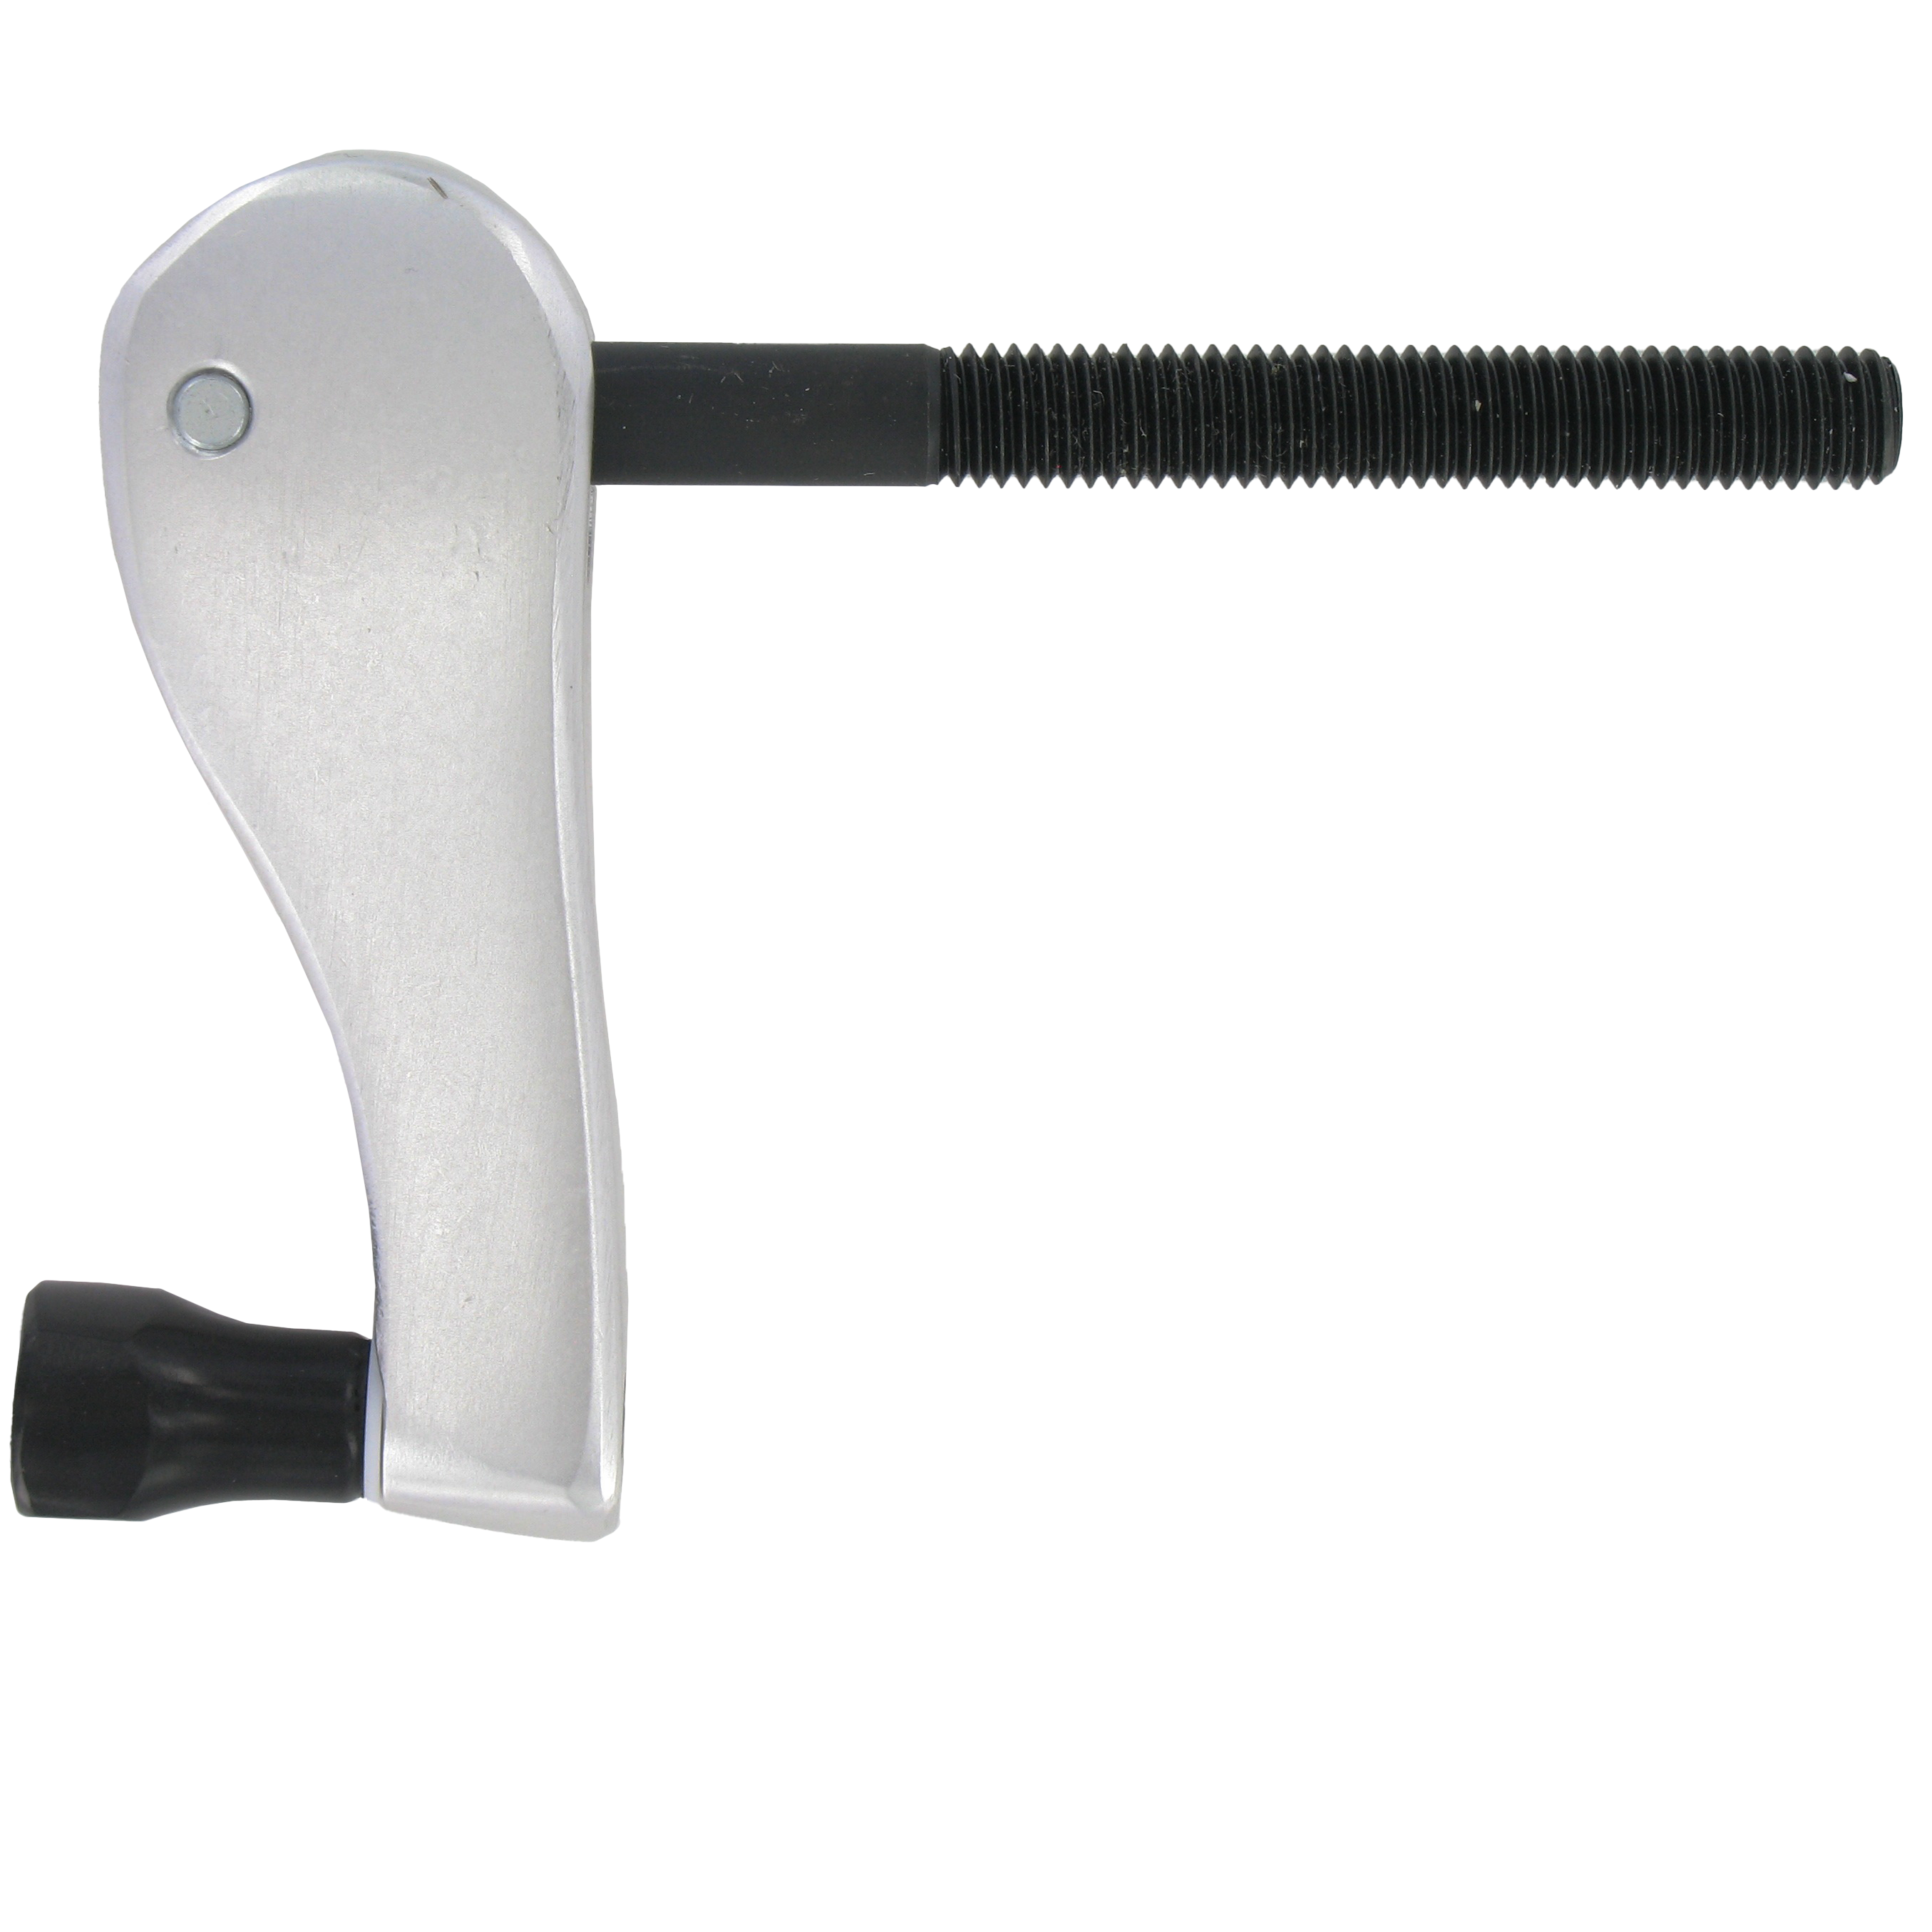 Spare quick lever for PR-72000 clamp